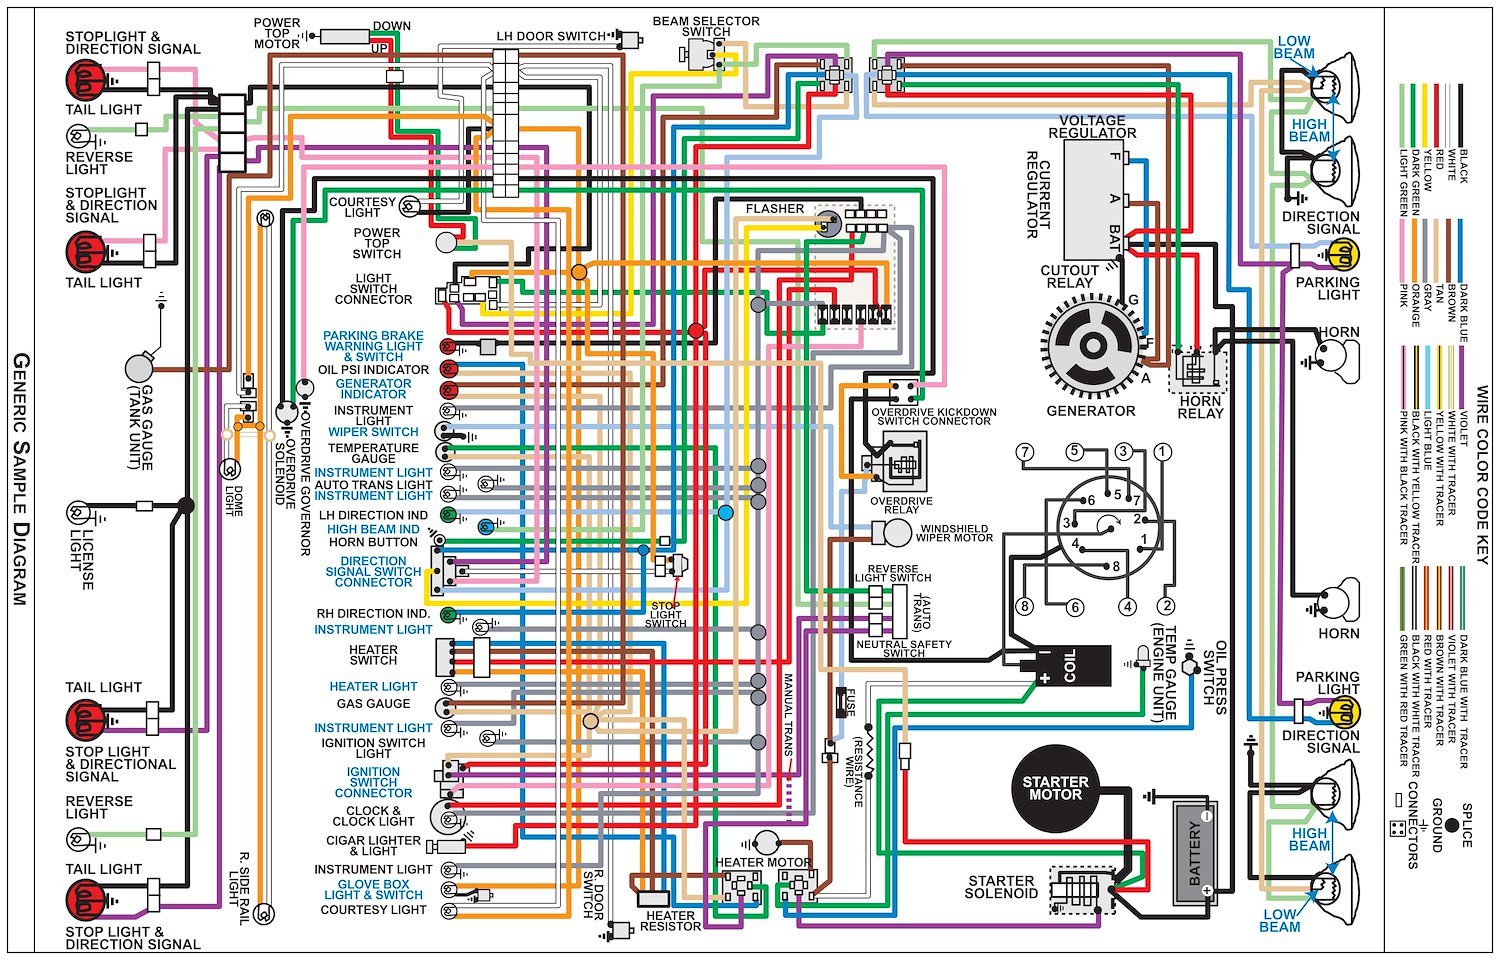 Wiring Diagram for 1967 Ford Mustang, 11 in x 17 in., Laminated